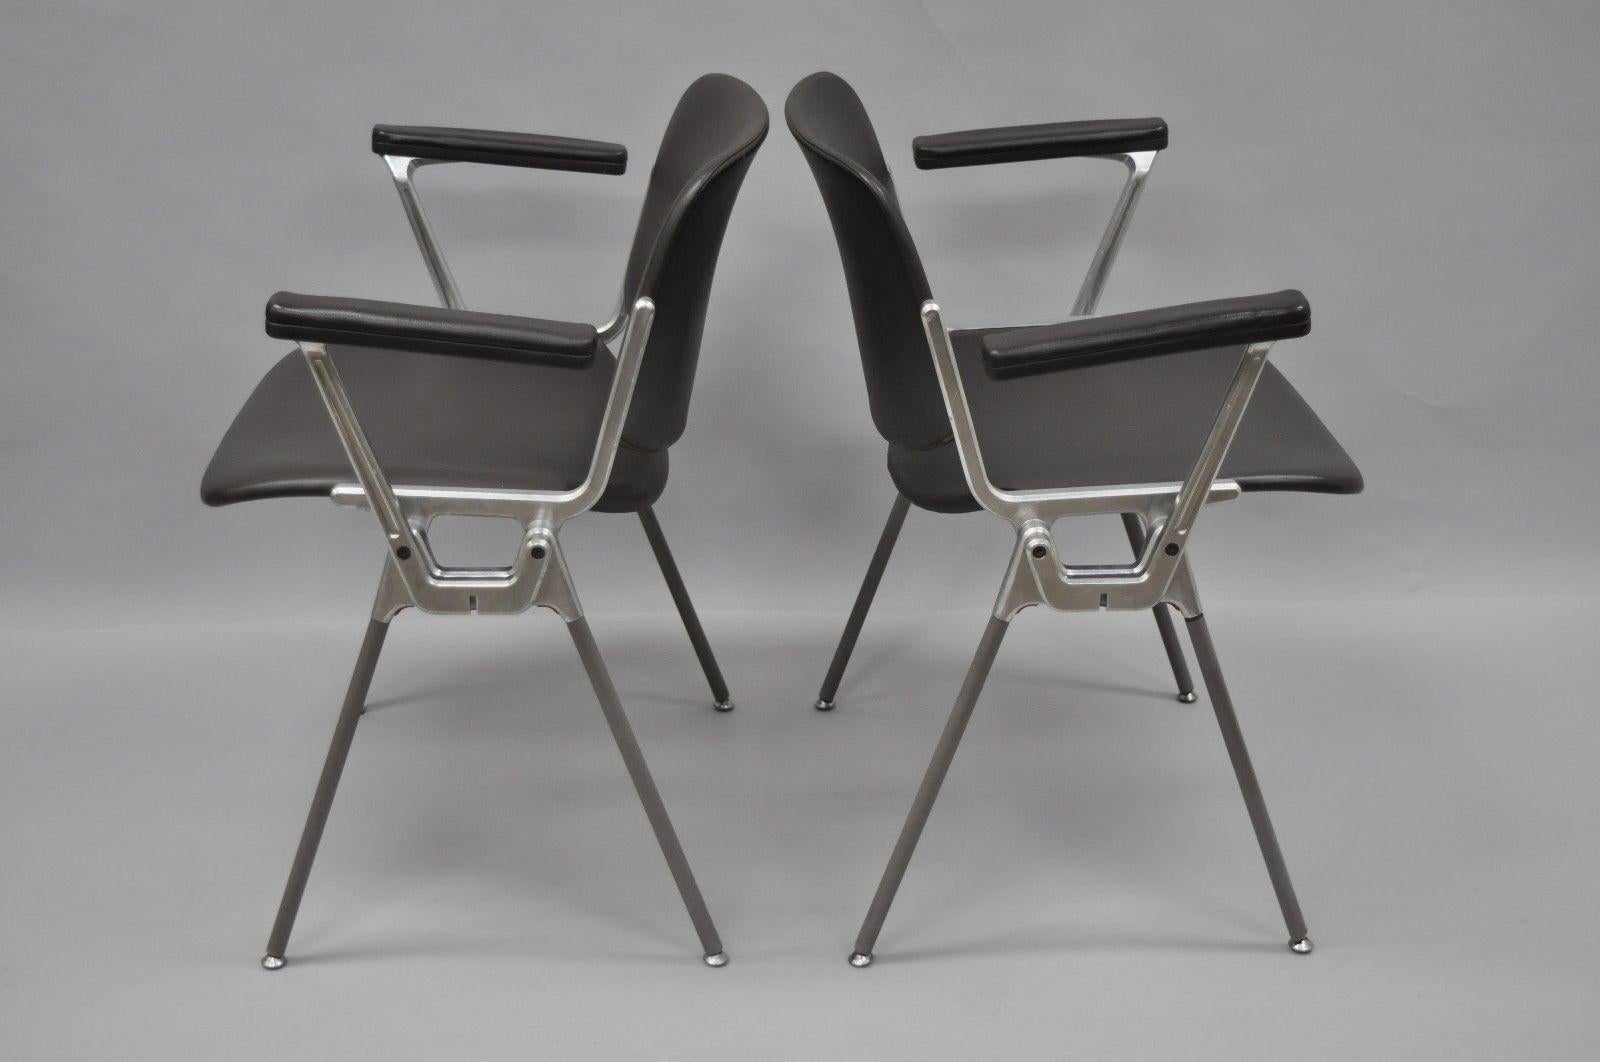 Pair of Giancarlo Piretti for Castelli Armchairs Italian Mid-Century Modern In Good Condition For Sale In Philadelphia, PA